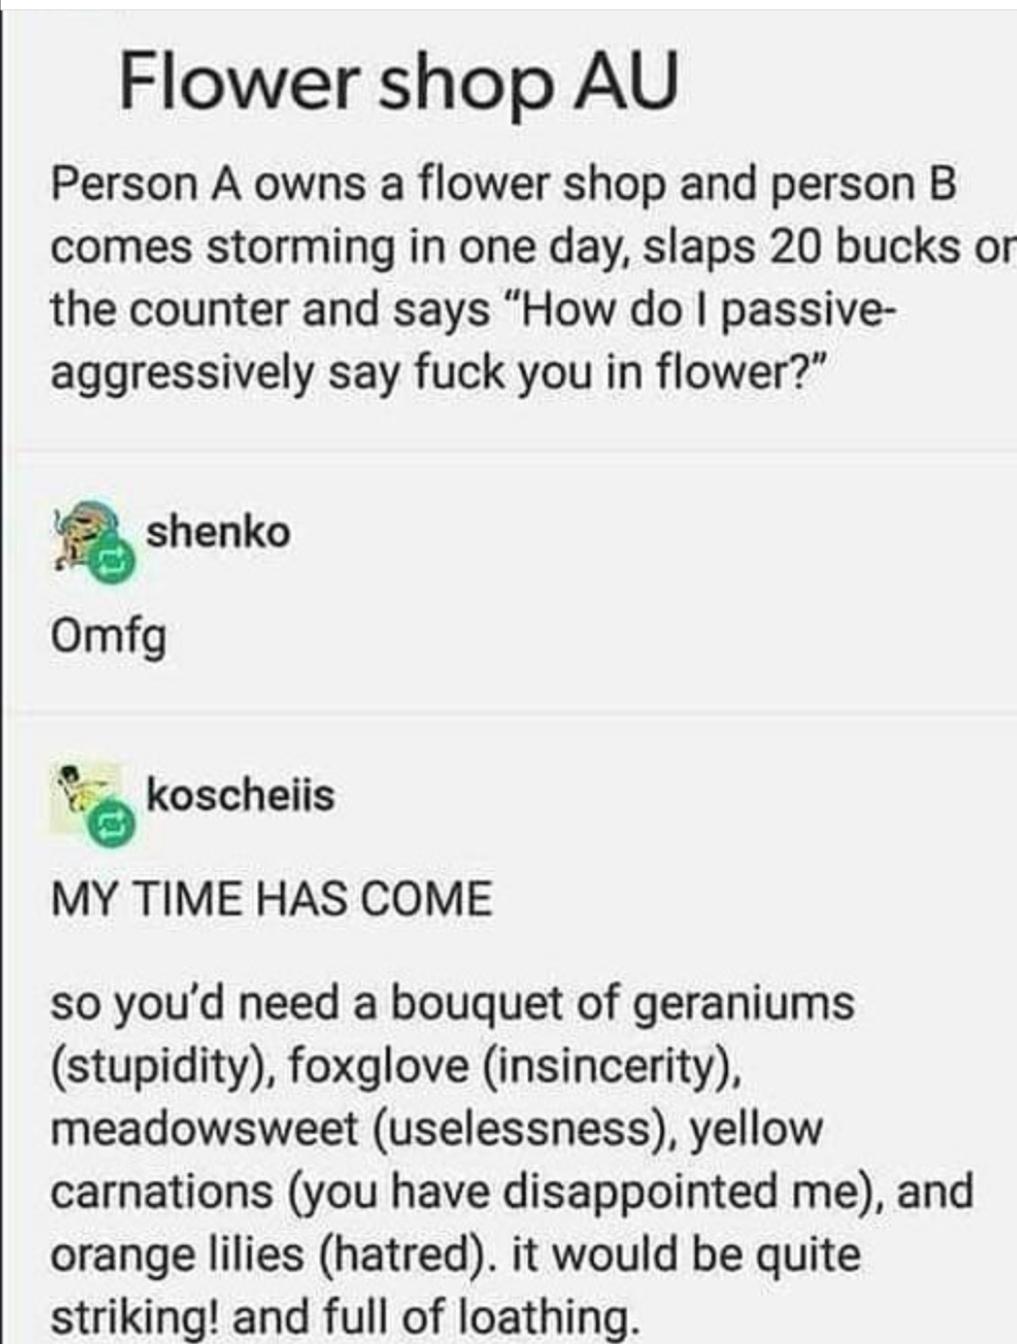 Flowers for your enemies.